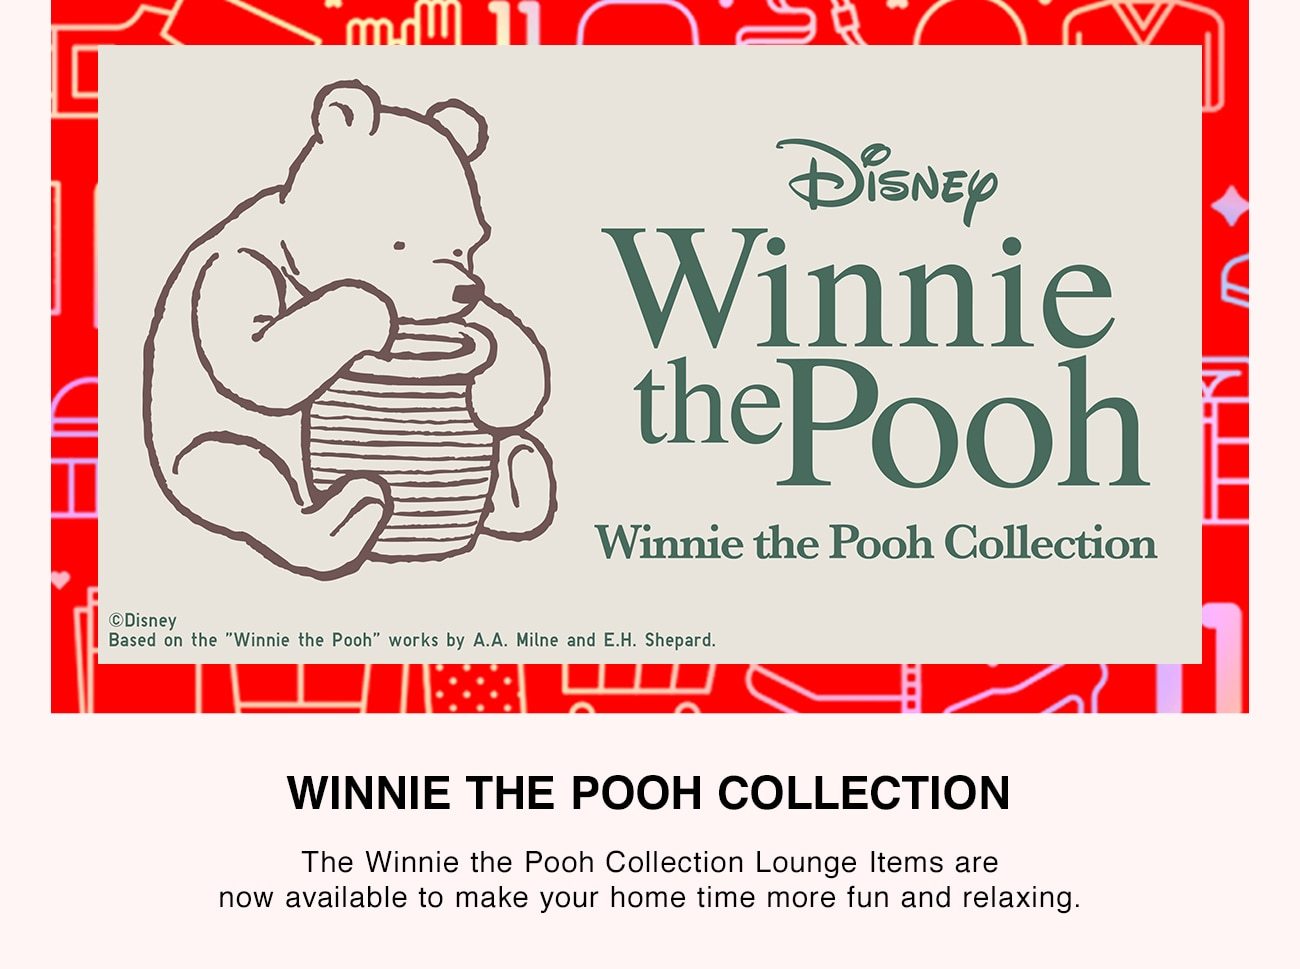 WINNIE THE POOH COLLECTION